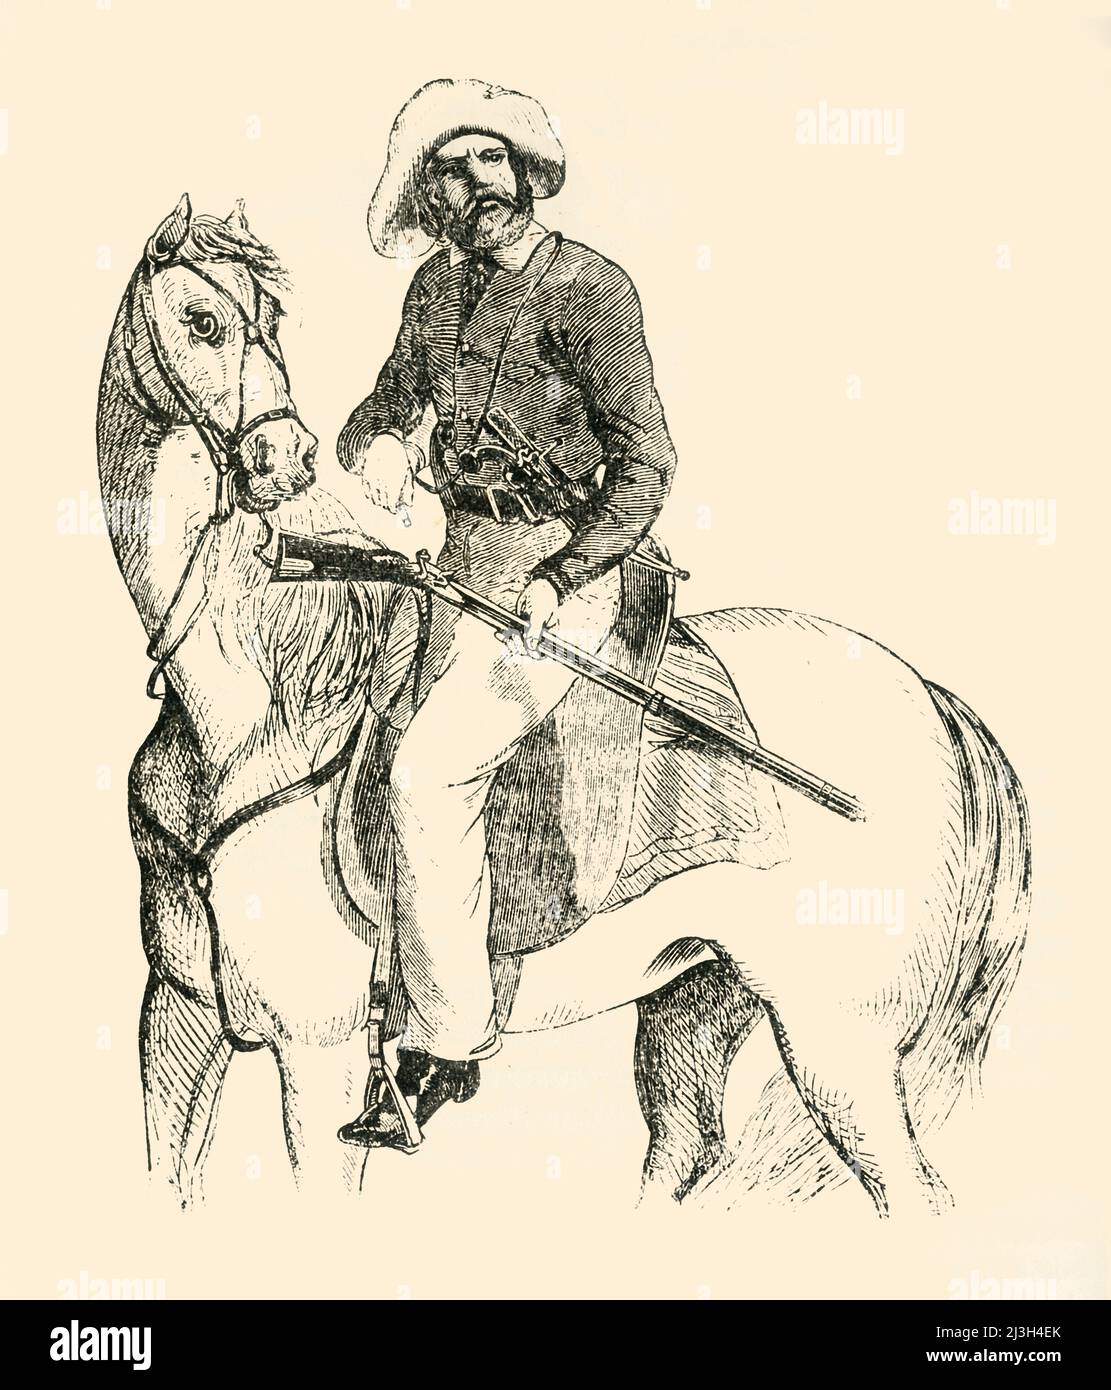 'A Texas Ranger', 1849. From &quot;Pictorial History of Mexico and the Mexican War&quot;, by John Frost, LL.D.. [Thomas, Cowperthwait and Co., Philadelphia, 1849] Stock Photo